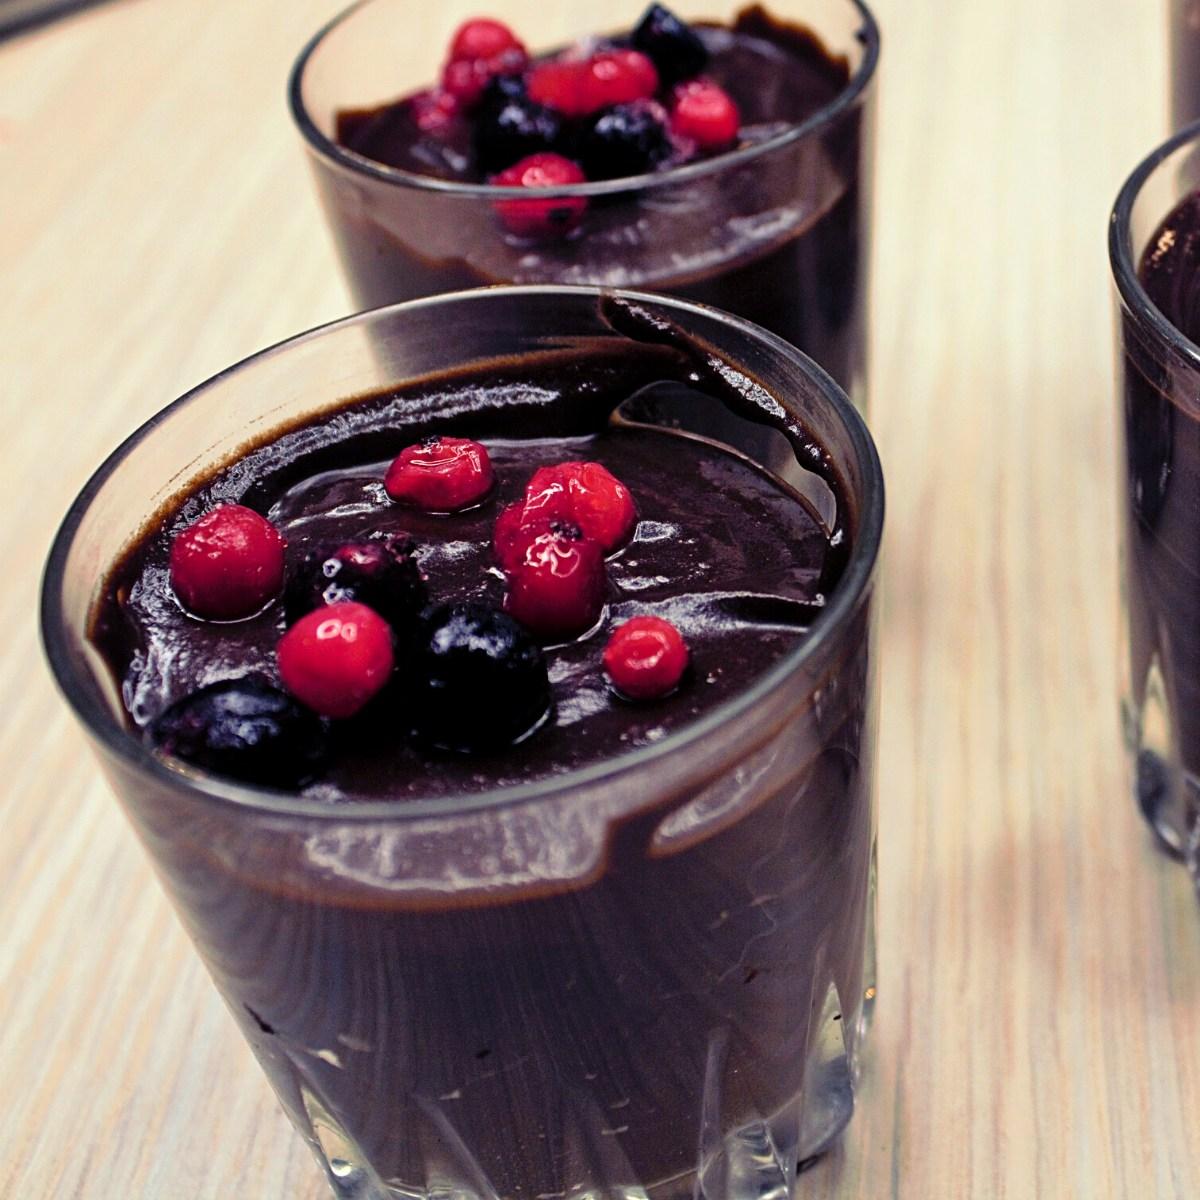 5-Ingredient Avocado Chocolate Mousse (Delicious and Nutritious Dessert)